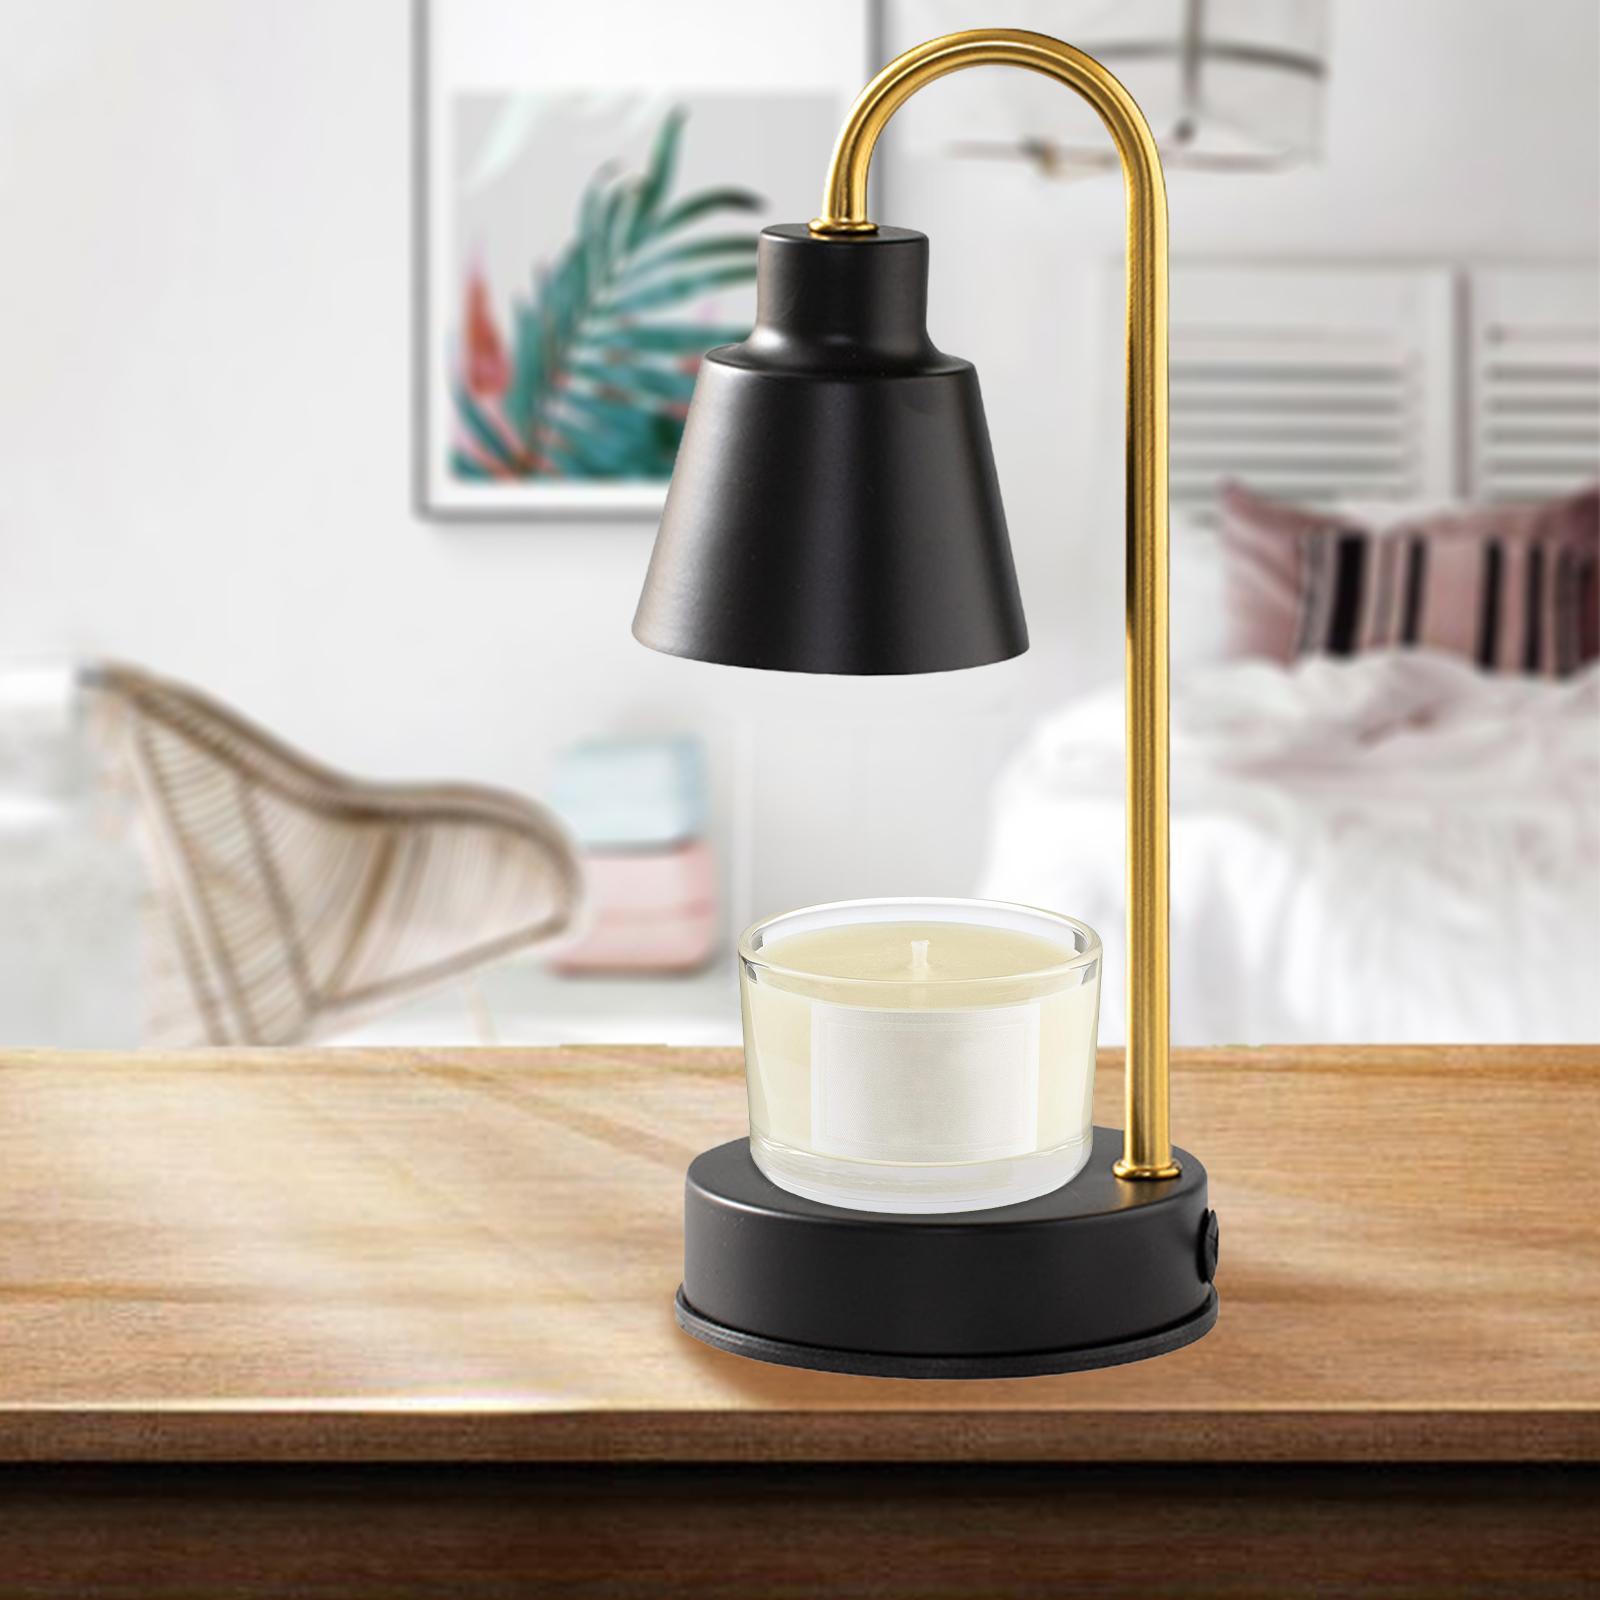 Dimmable Melting Lamp Candle Warmer Hotel Tealight Holder